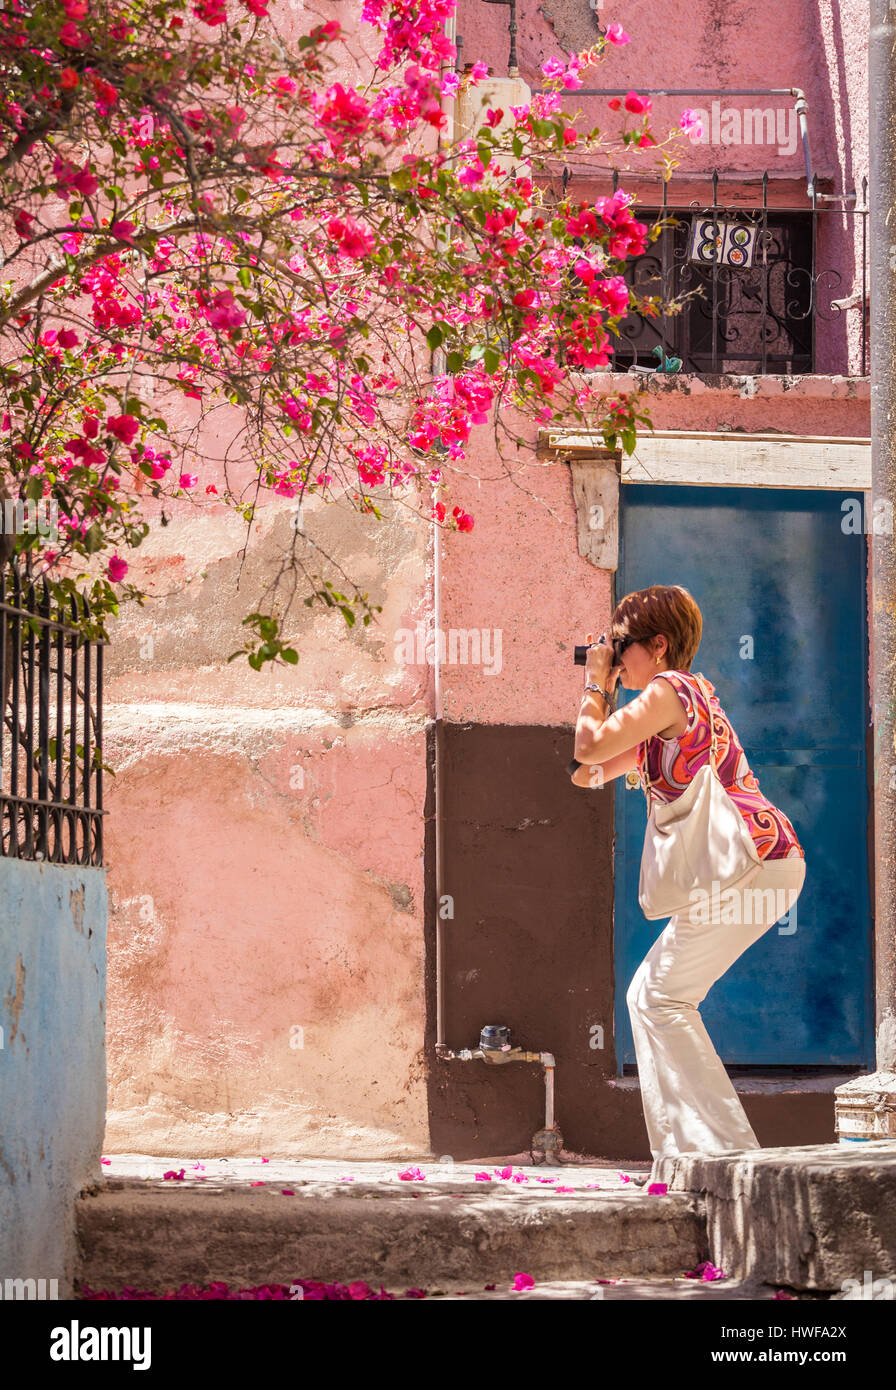 A female tourist shoots for color along  the narrow streets of Guanajuato, Mexico. Stock Photo